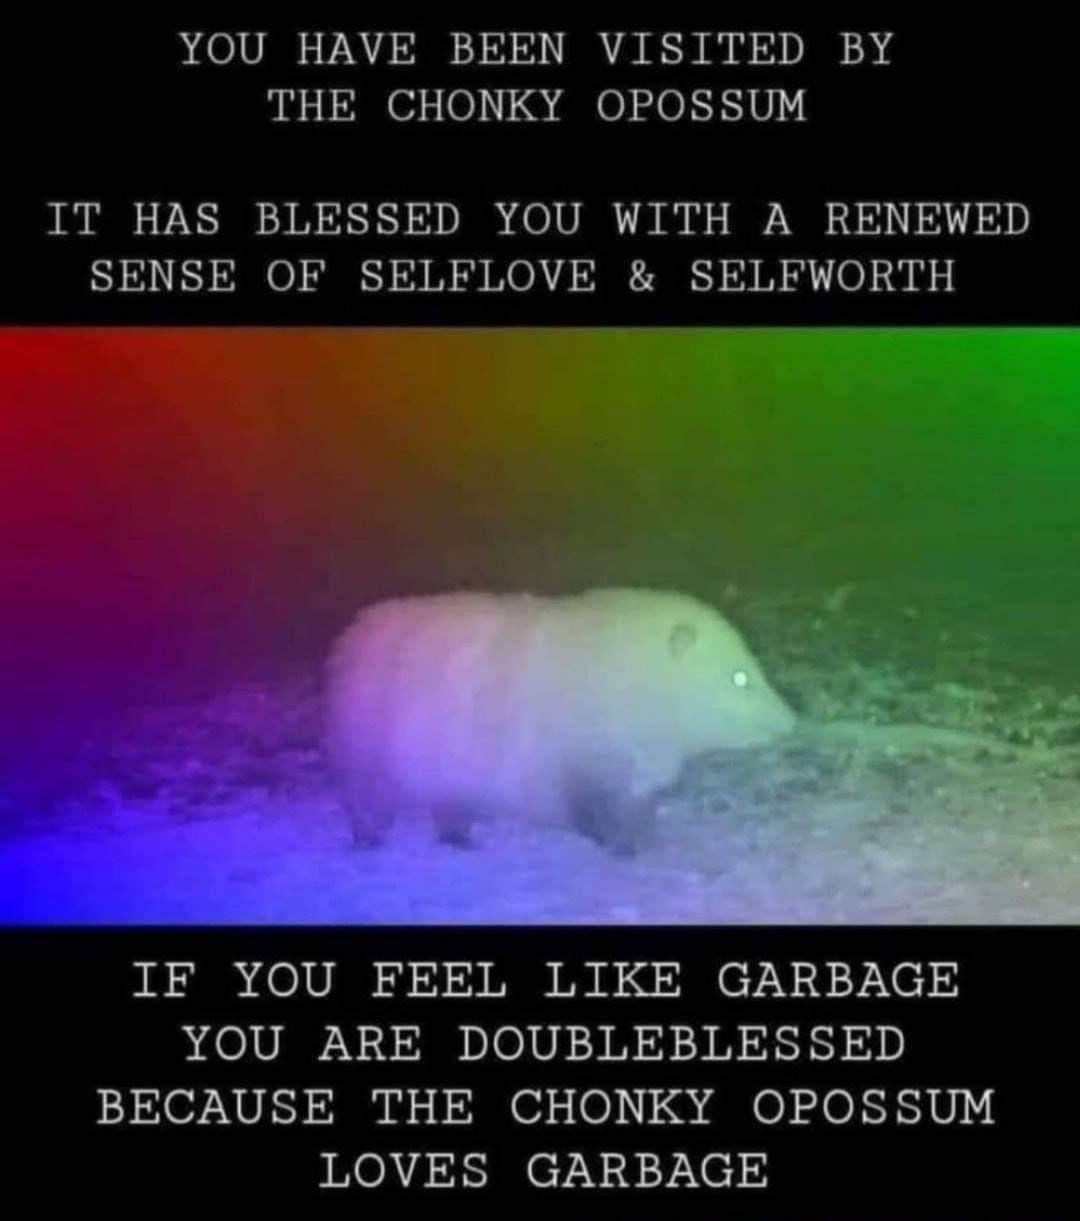 chonky possum meme - You Have Been Visited By The Chonky Opossum It Has Blessed You With A Renewed Sense Of Selflove & Selfworth If You Feel Garbage You Are Doubleblessed Because The Chonky Opossum Loves Garbage